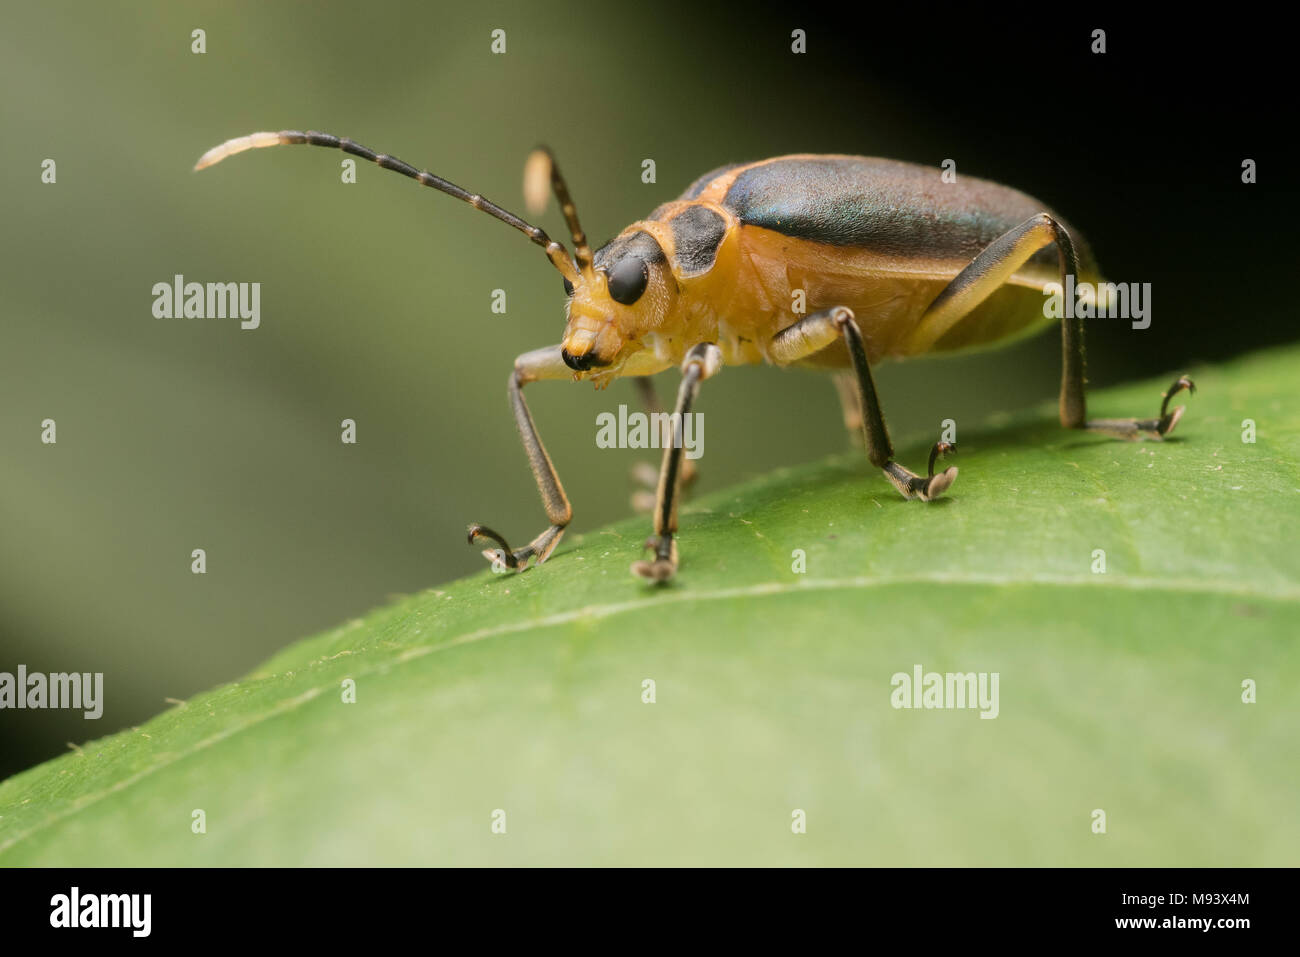 A leaf beetle (Family Chrysomelidae) from Peru. Stock Photo